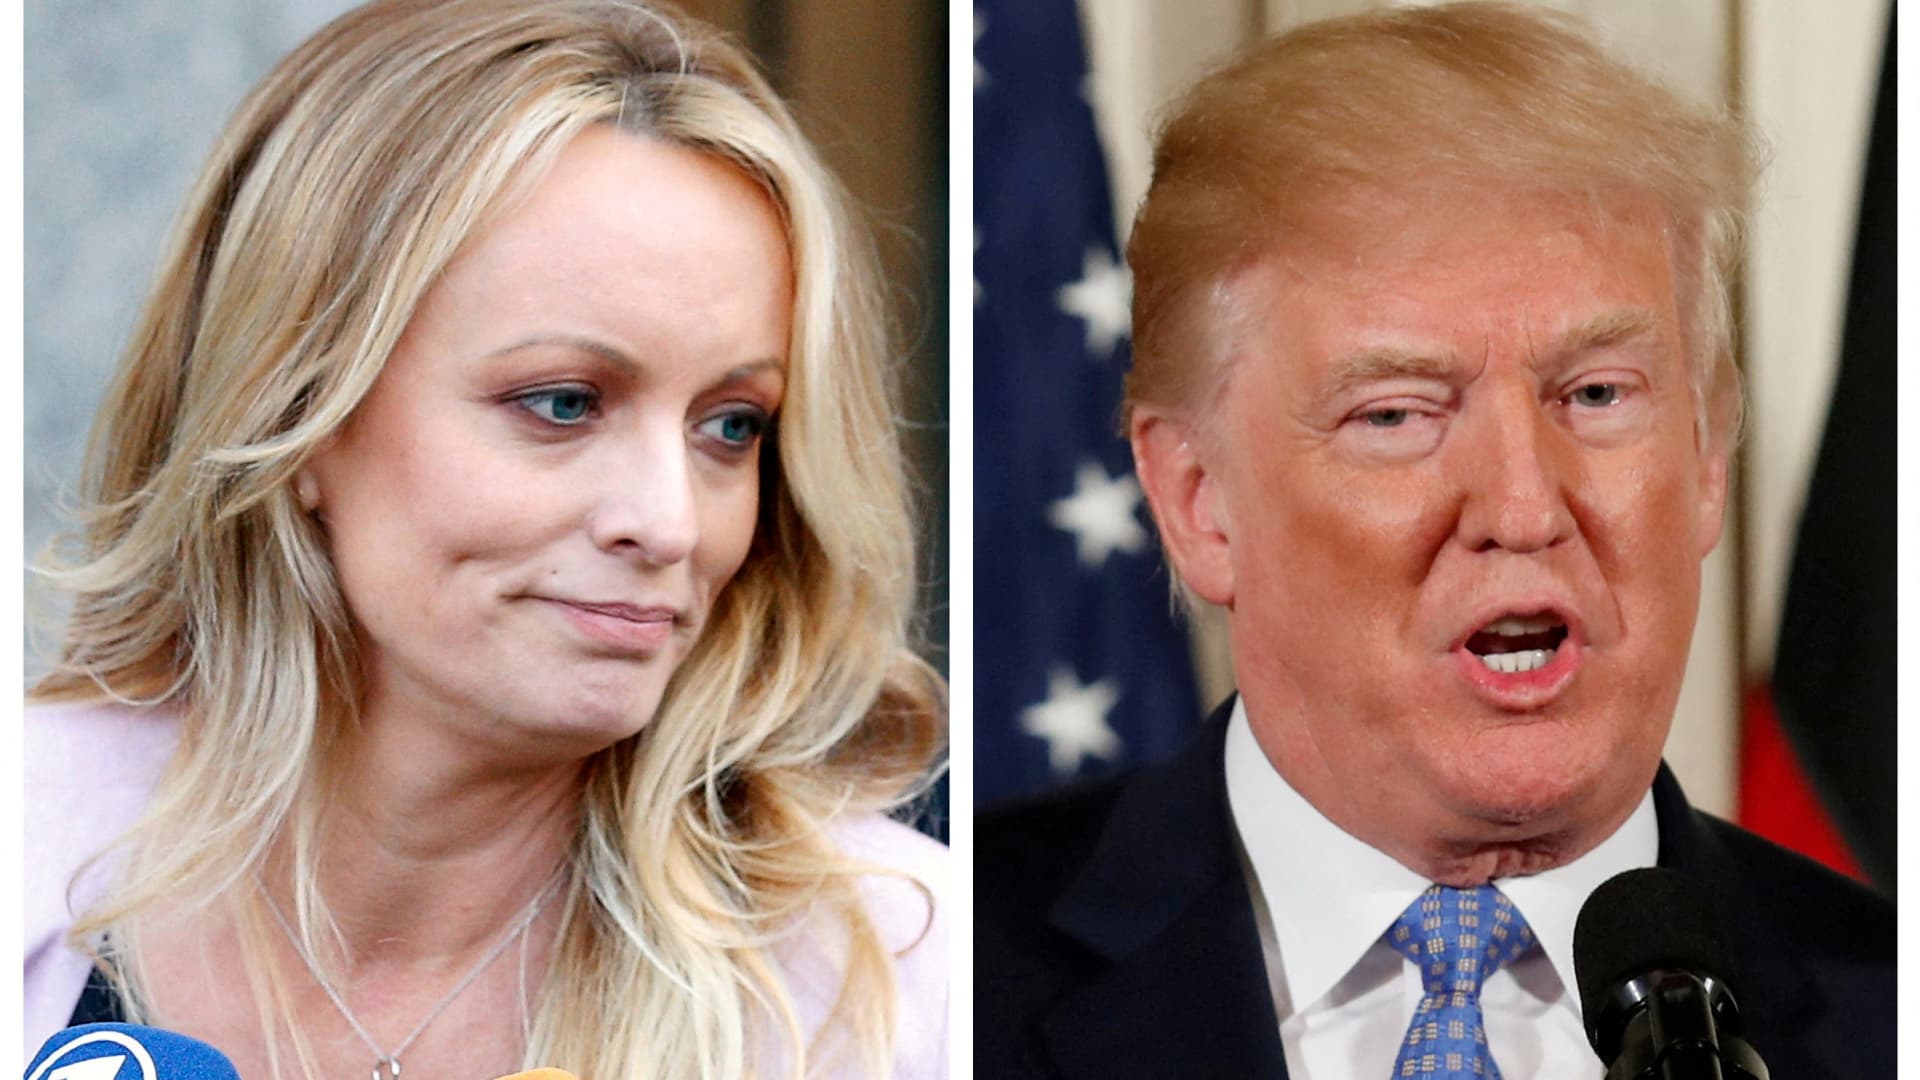 Stormy Daniels will testify about hush money and alleged sex with ex-president